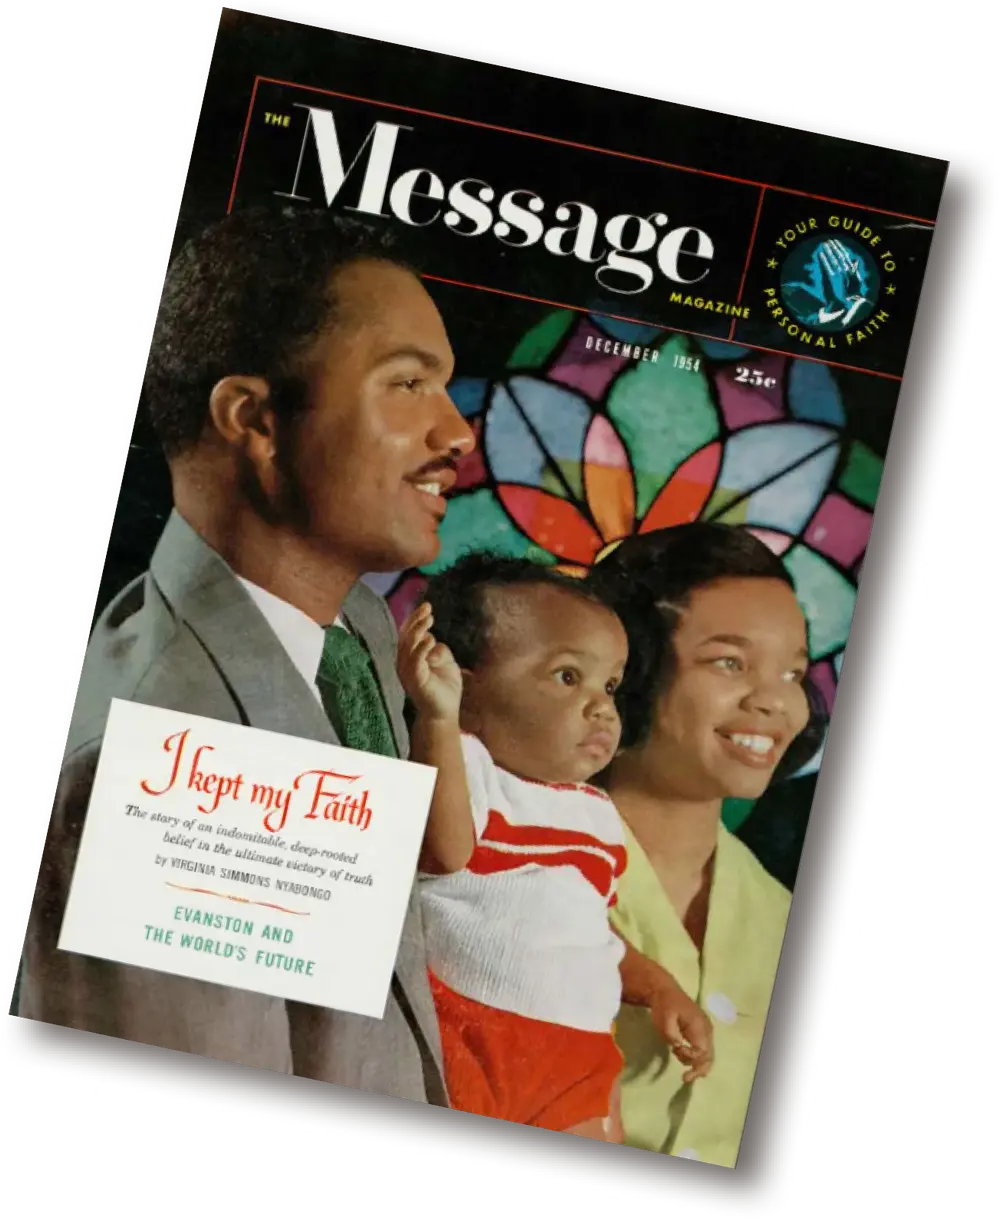 December 1954 issue cover of Message Magazine featuring "I Kept my Faith"